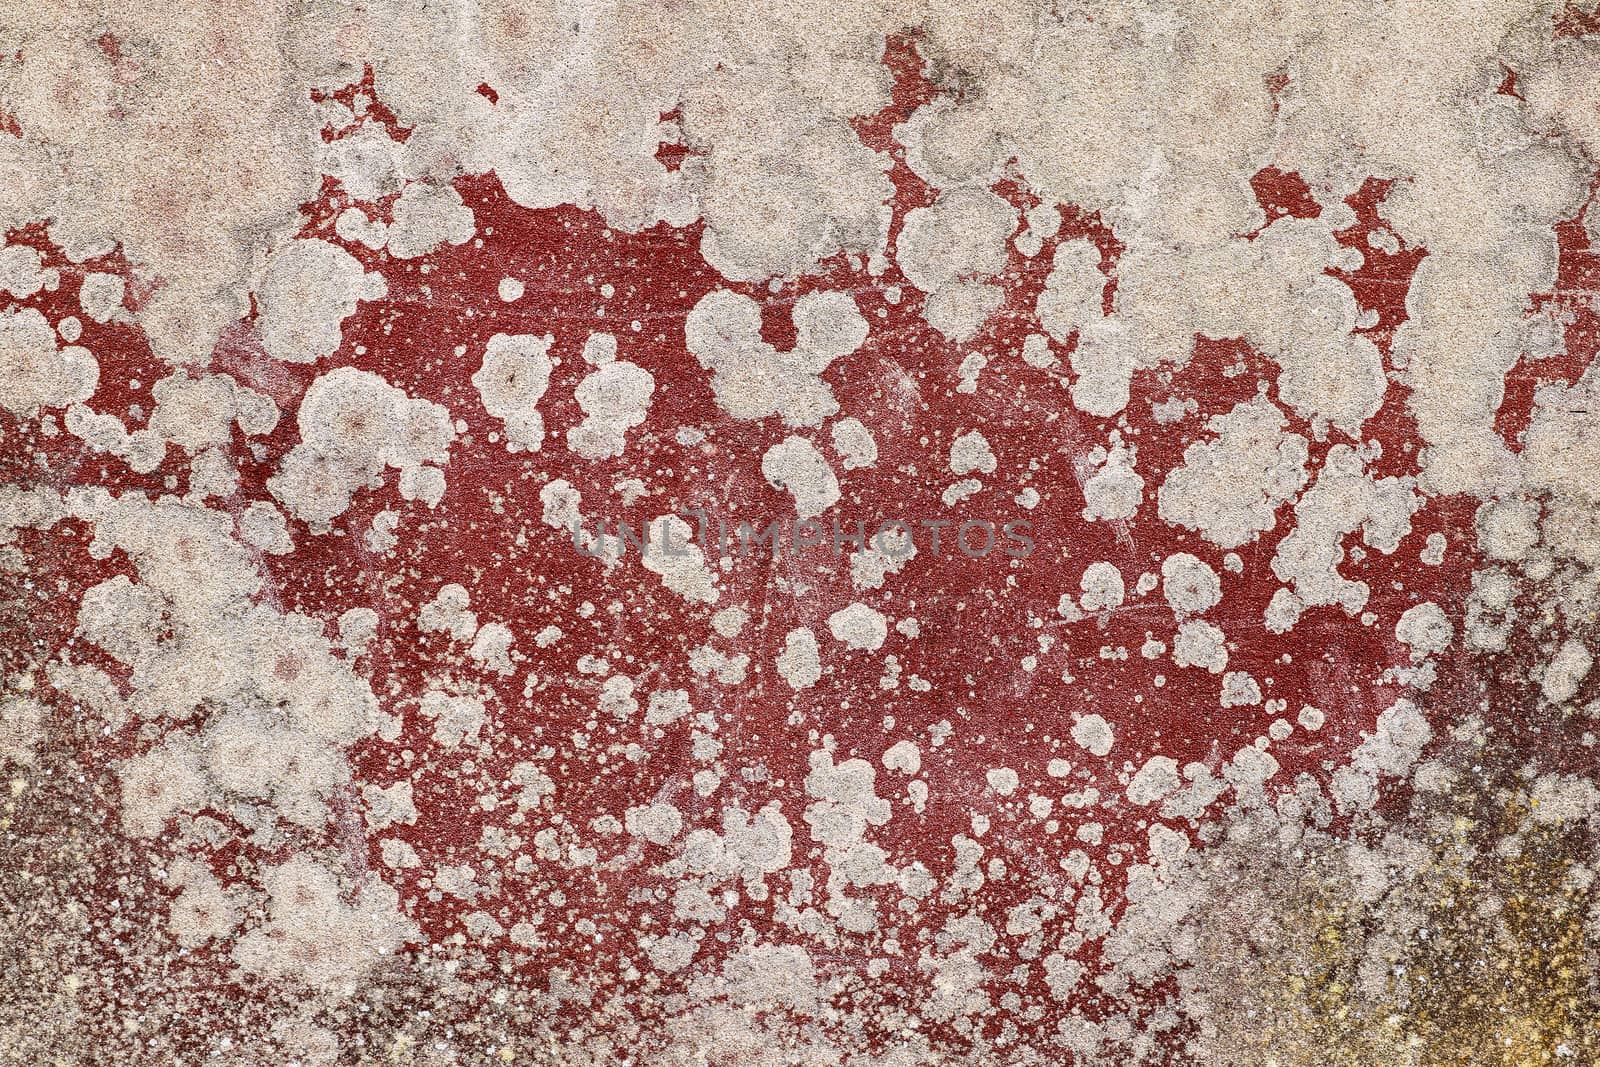 Detail of the weathered cracked plaster - grunge texture